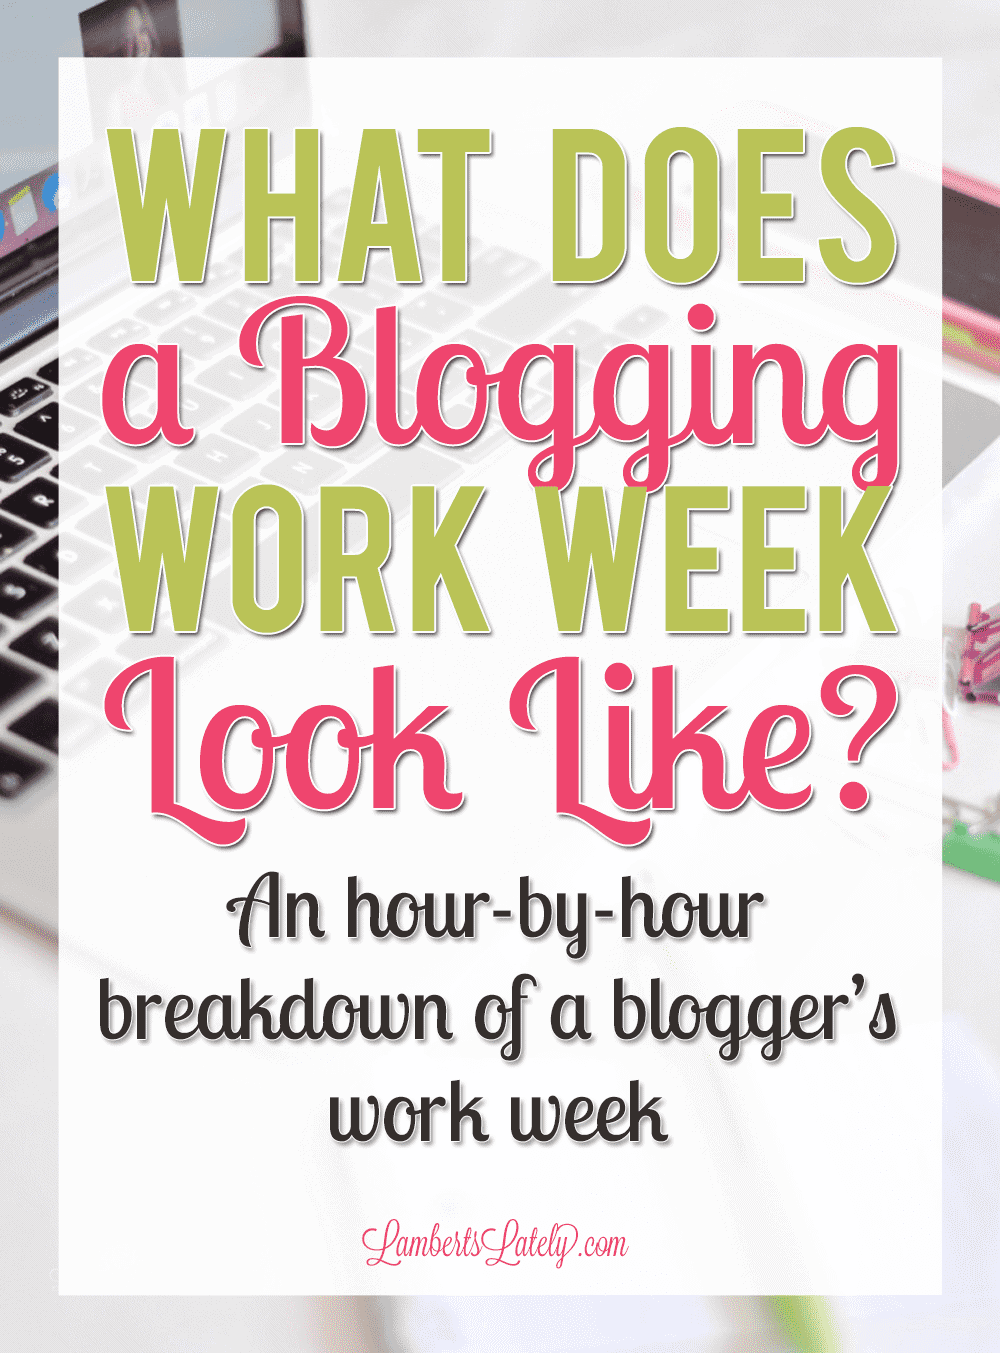 What Does a Blogging Work Week Look Like?